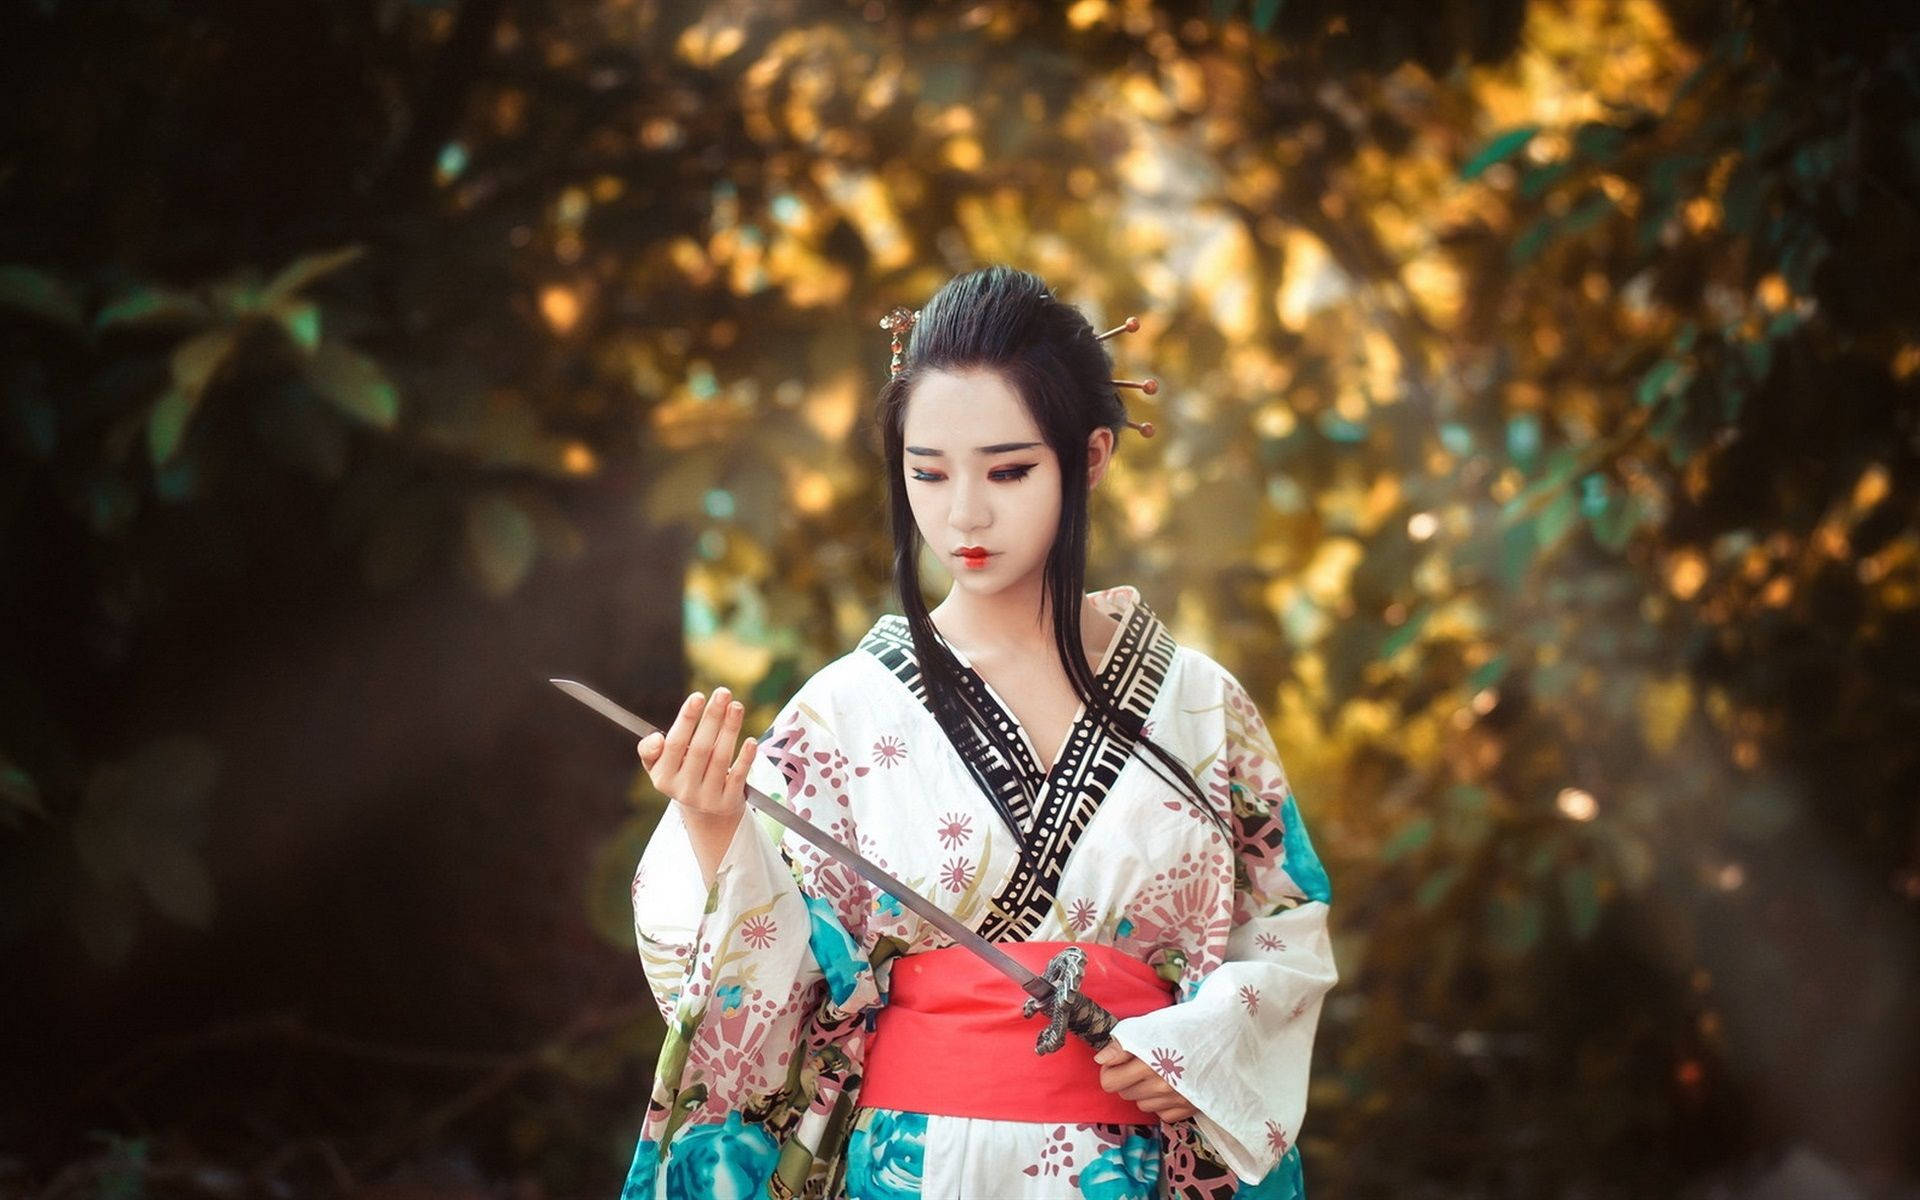 Japan Girl In A Kimono With A Sword